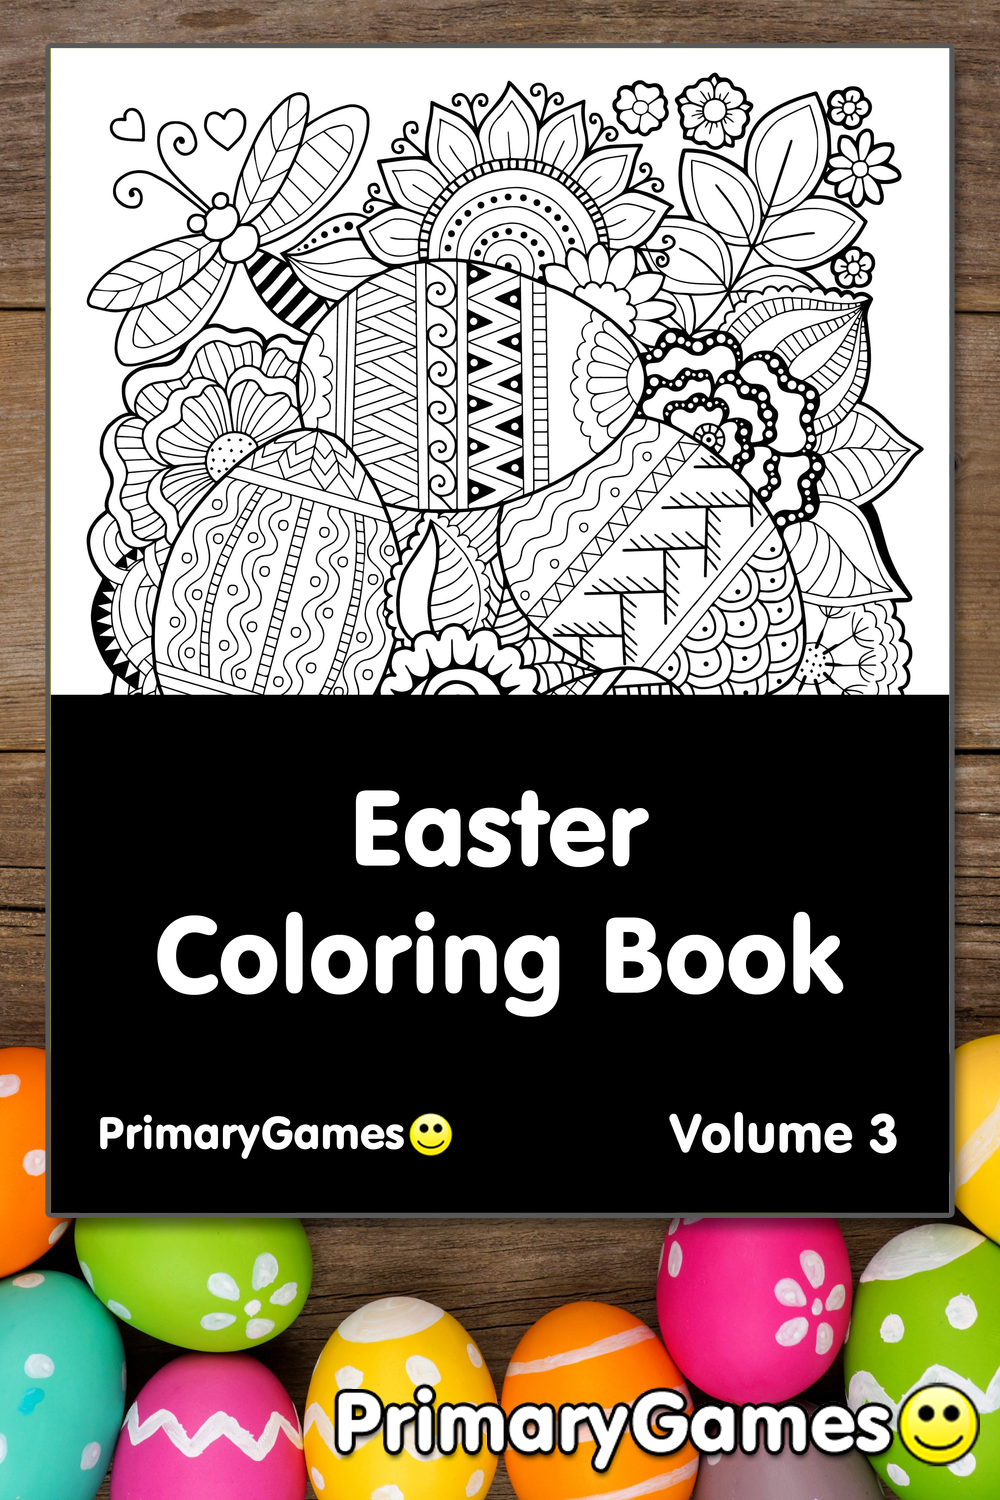 Easter Coloring eBook Volume 3 • FREE Printable PDF from ...